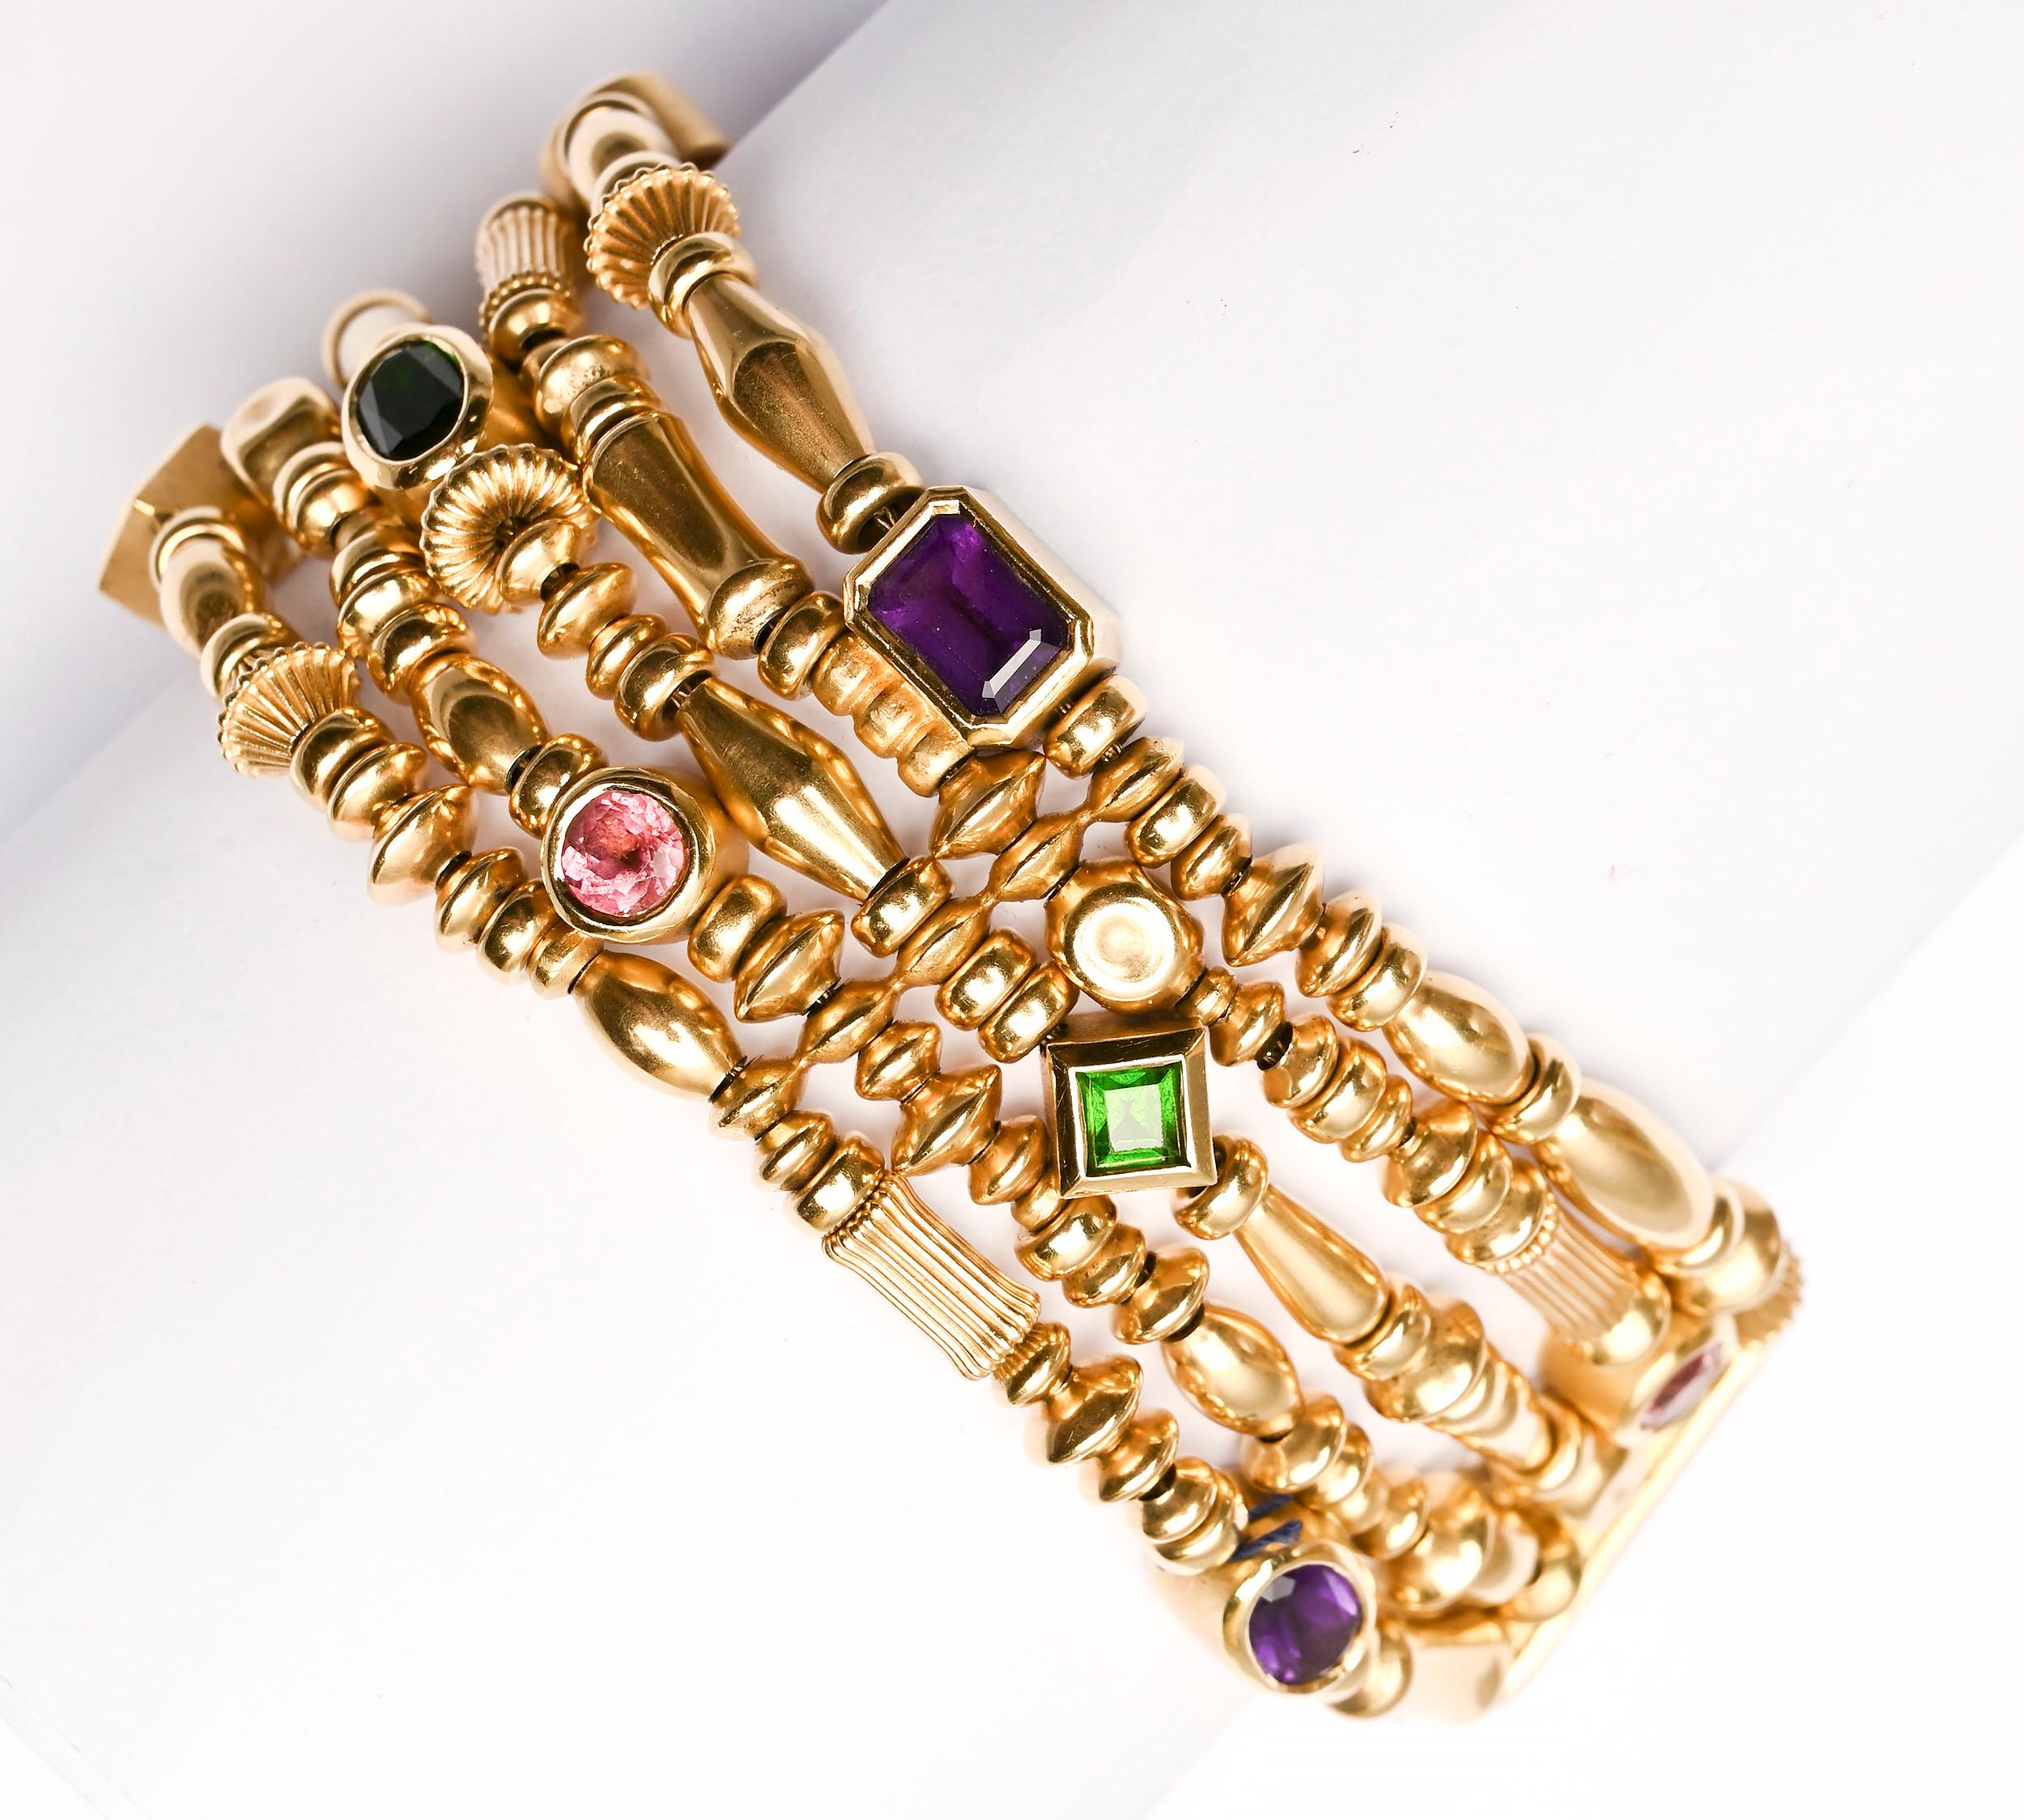 Seidengang bracelet of five strands of gold beads of varying shapes and sizes. Interspersed with the beads are square; round; oval and rectangular stones that include tourmaline; citrine and amethyst. The bracelet is 7 1/8 inches long and 1 inch